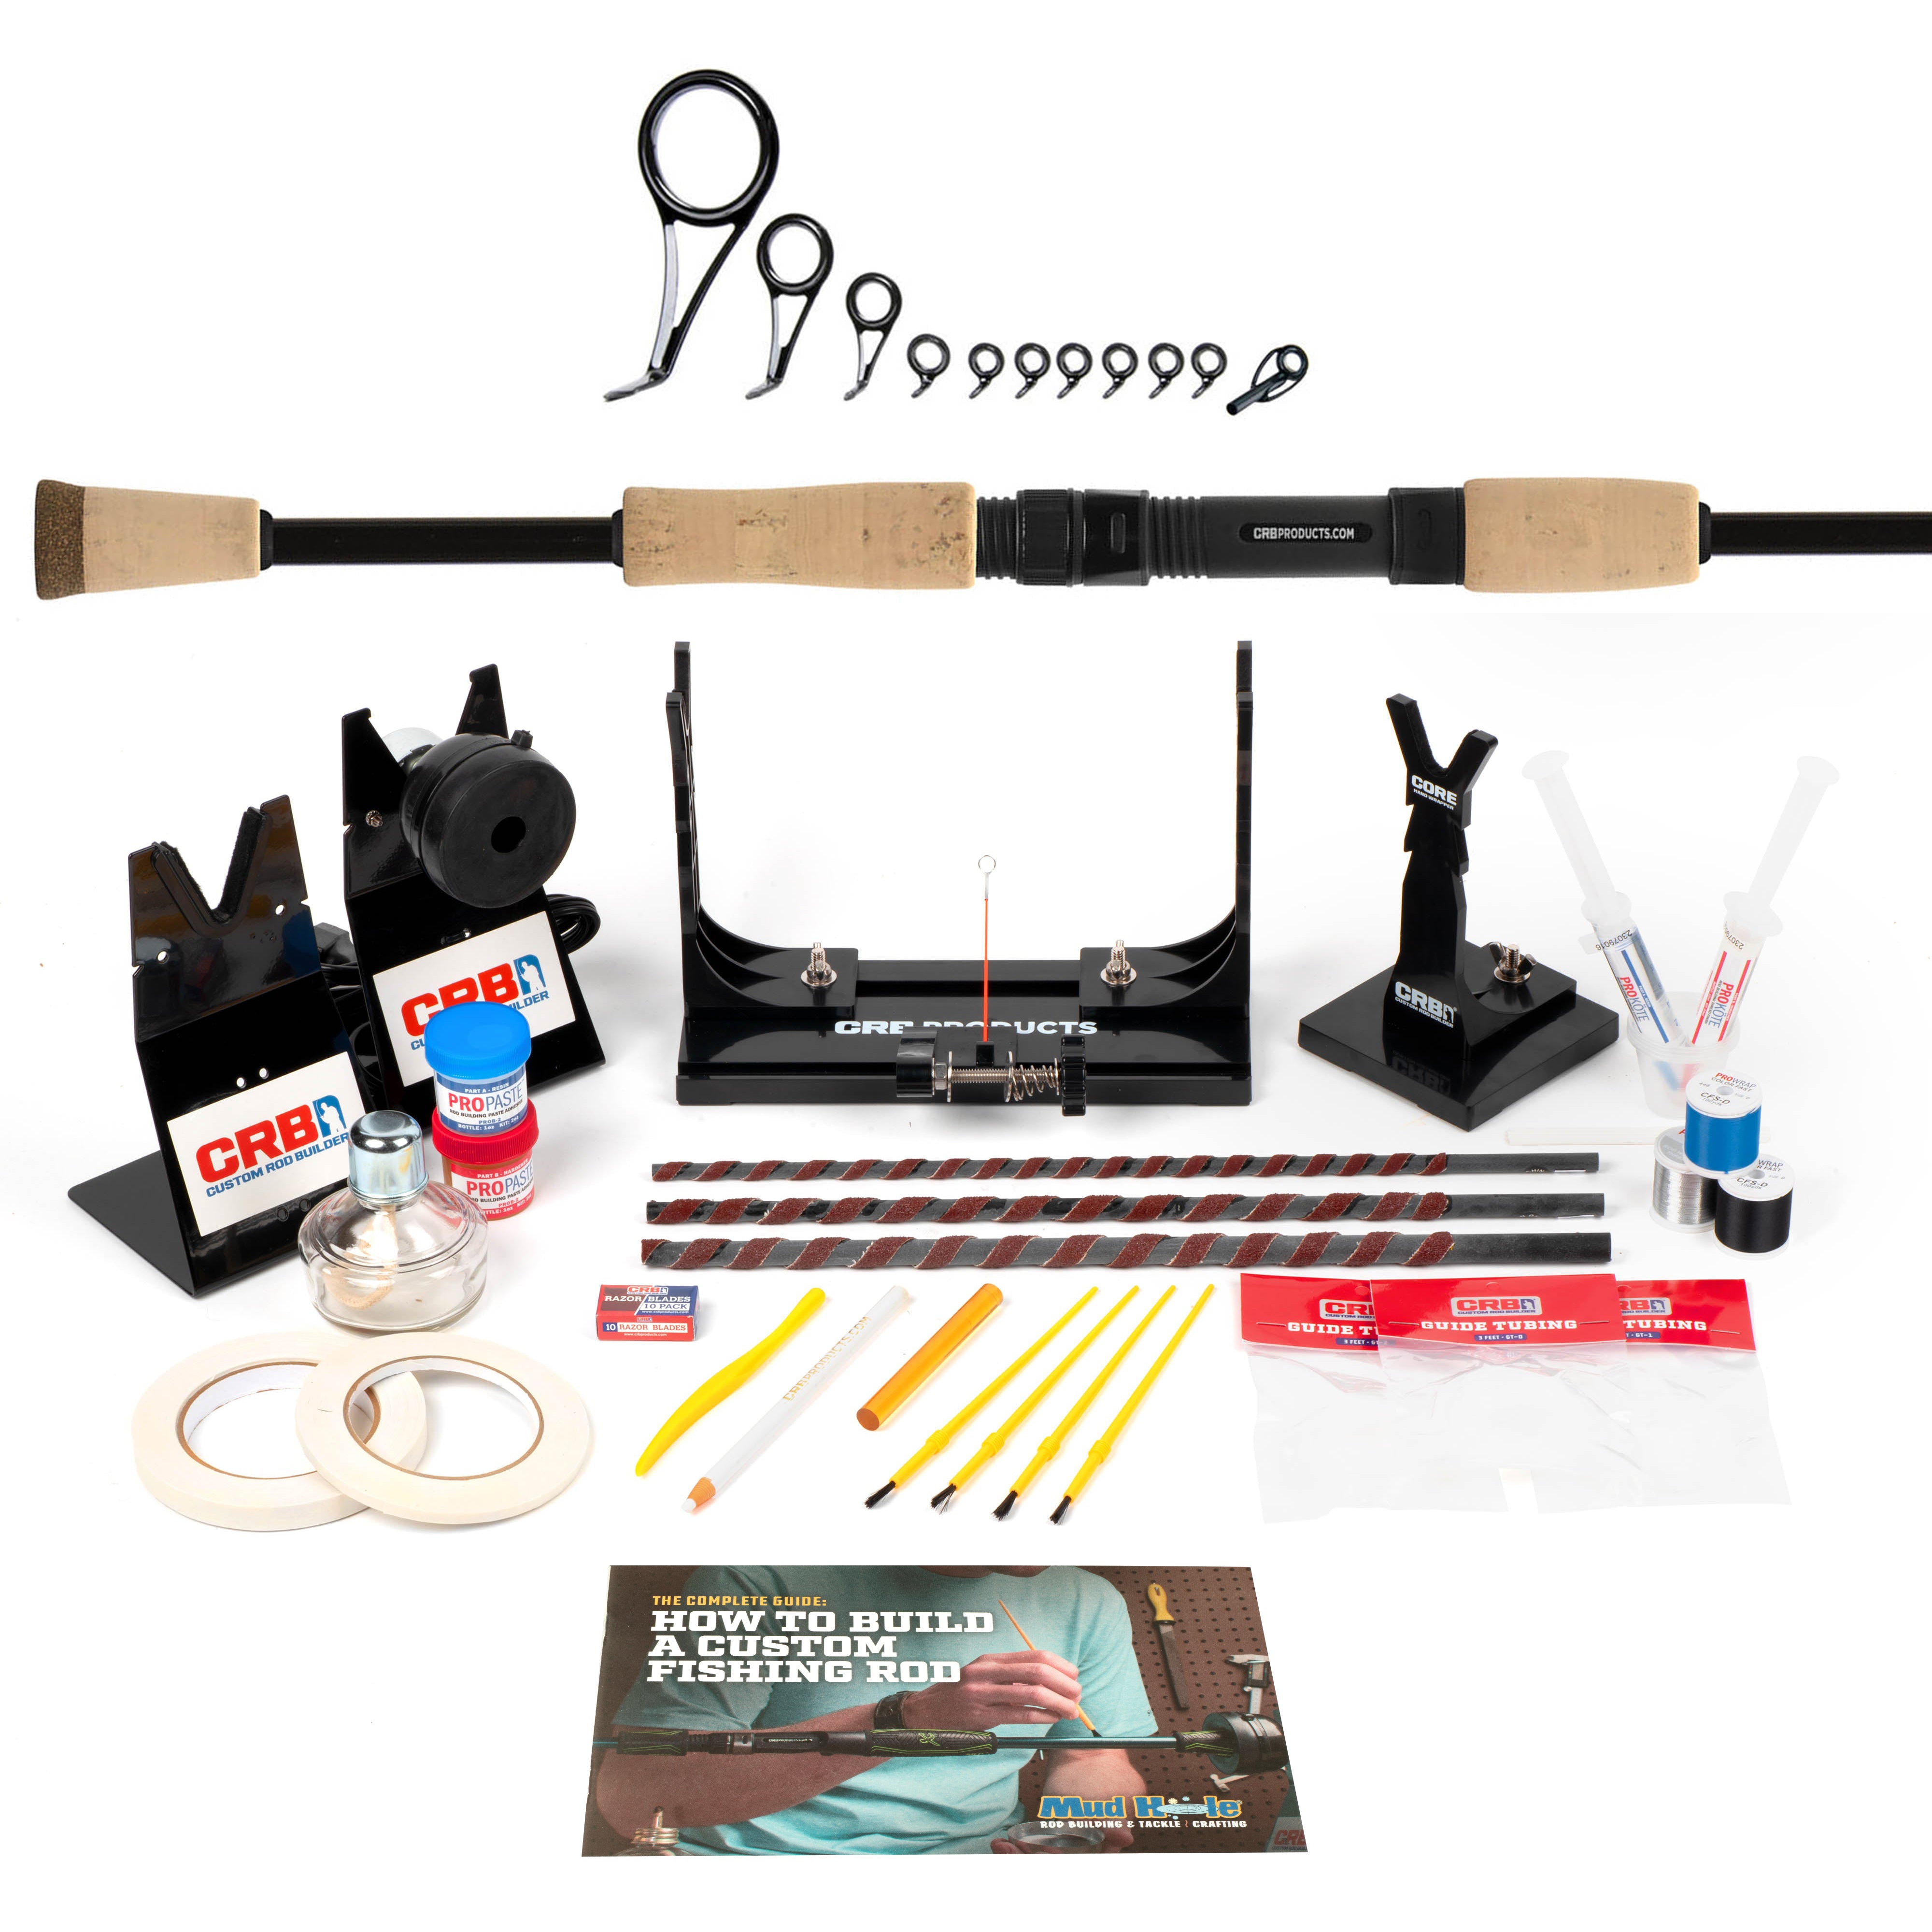 All In One Rod Building Kit – IS661M 6'6 Medium Spinning